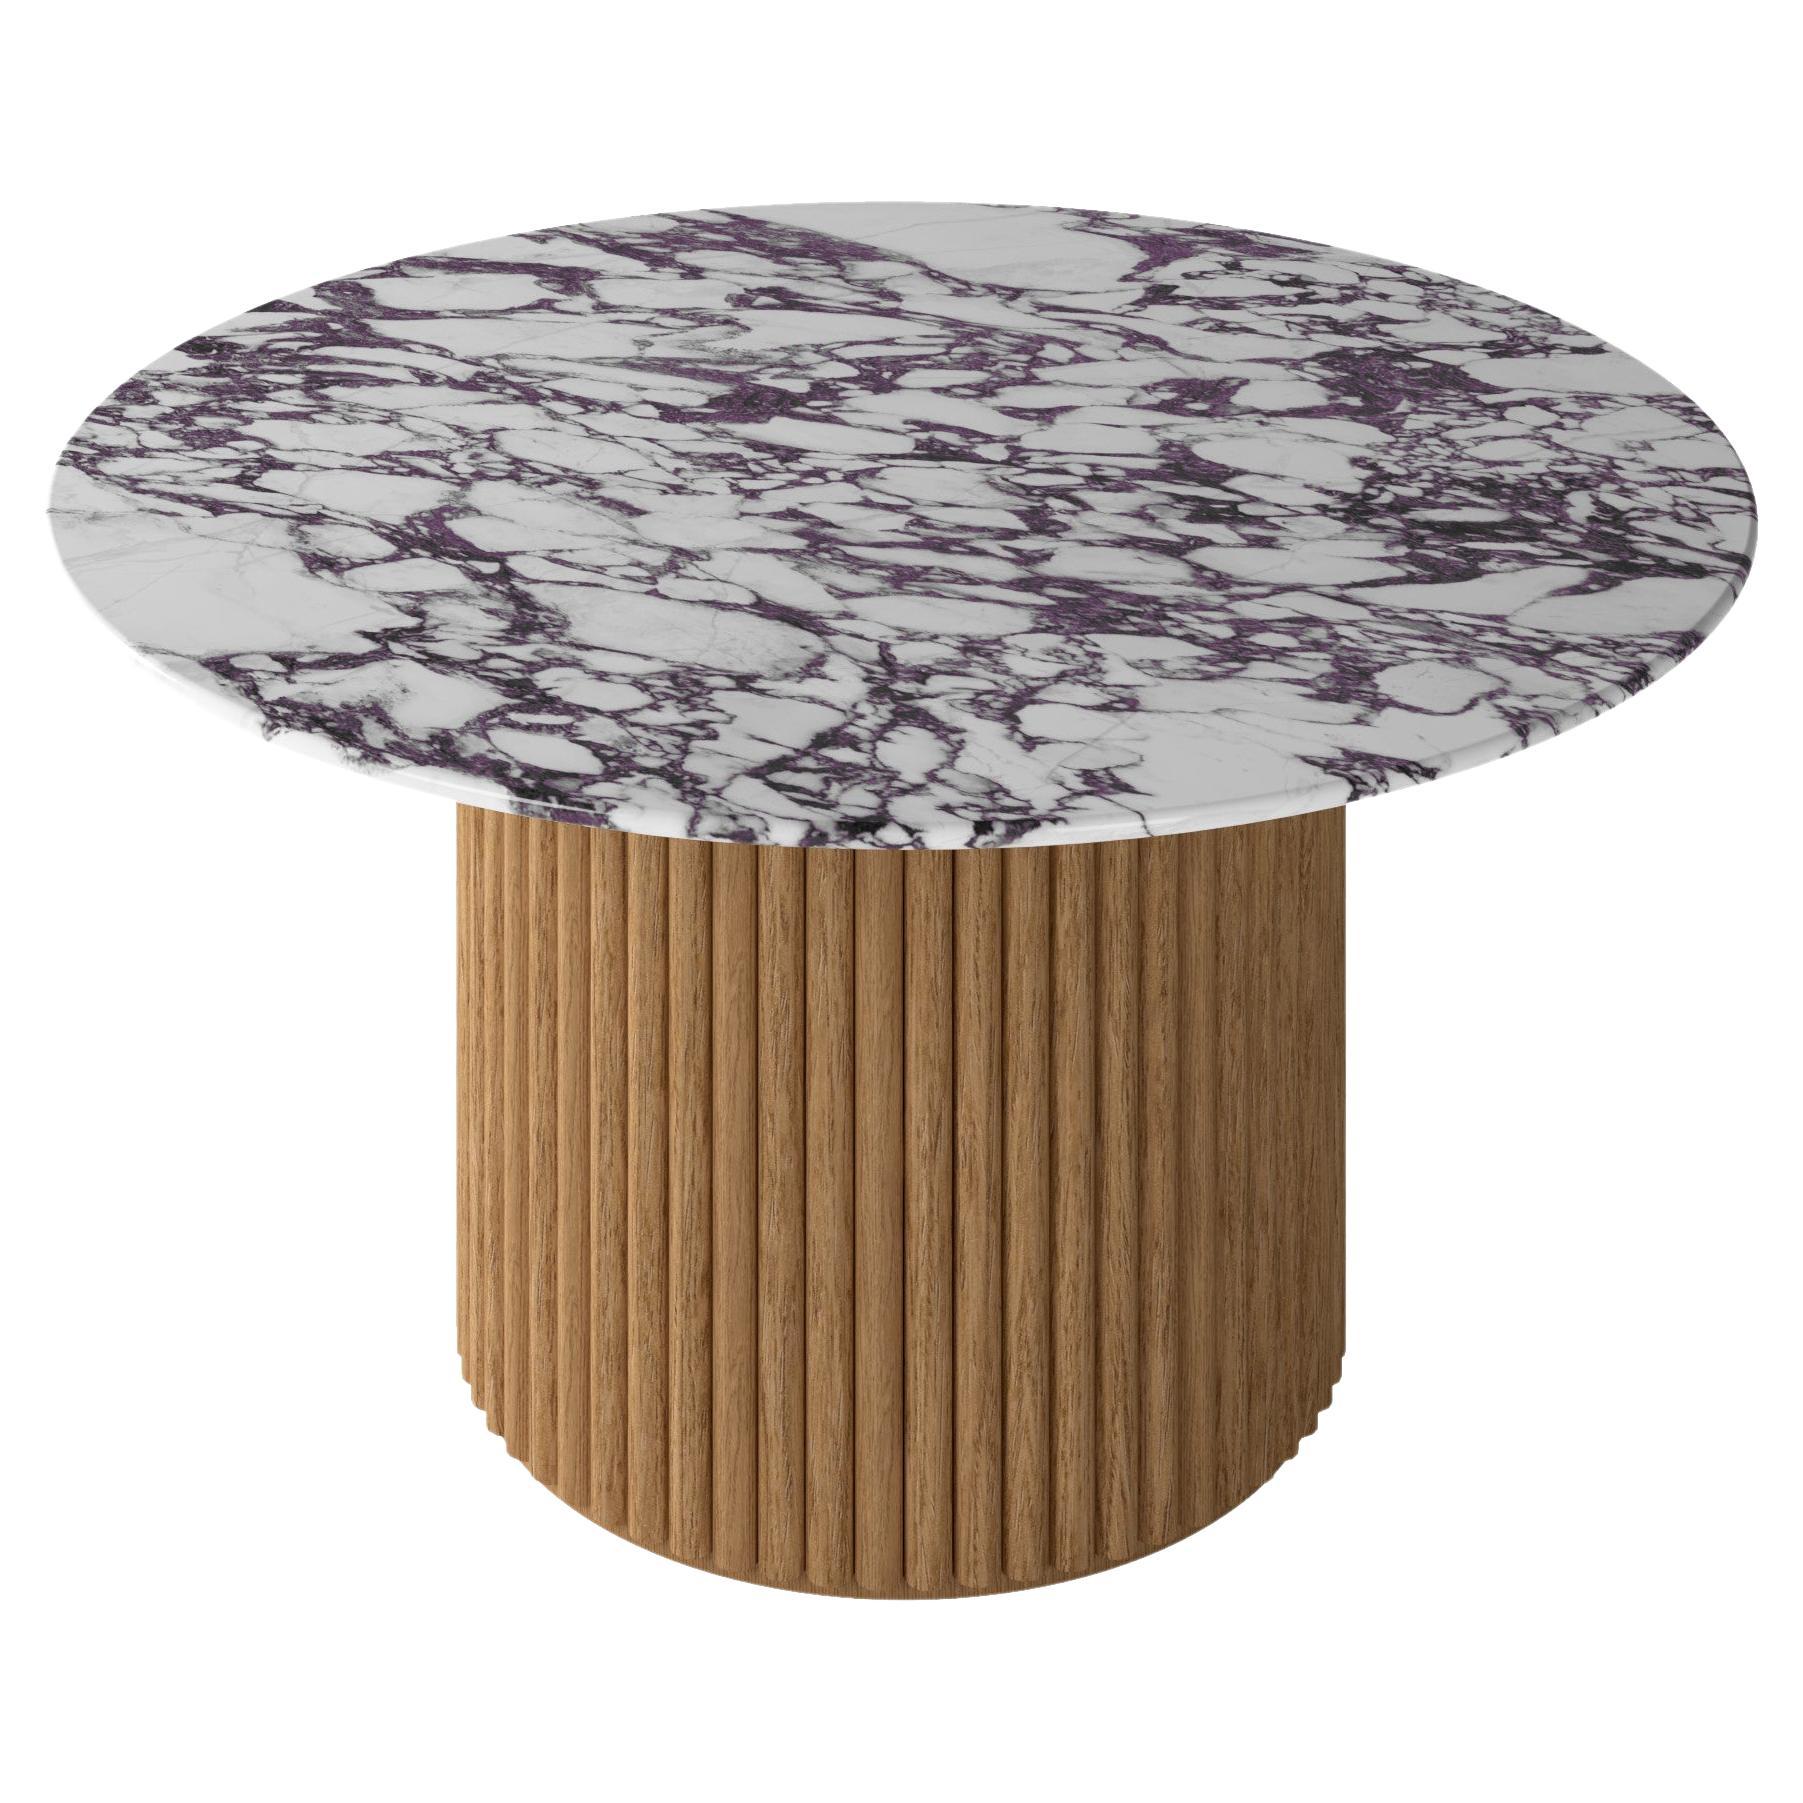 NORDST Mette Dining Table, Italian Calacatta viola Marble, Danish Modern Design For Sale